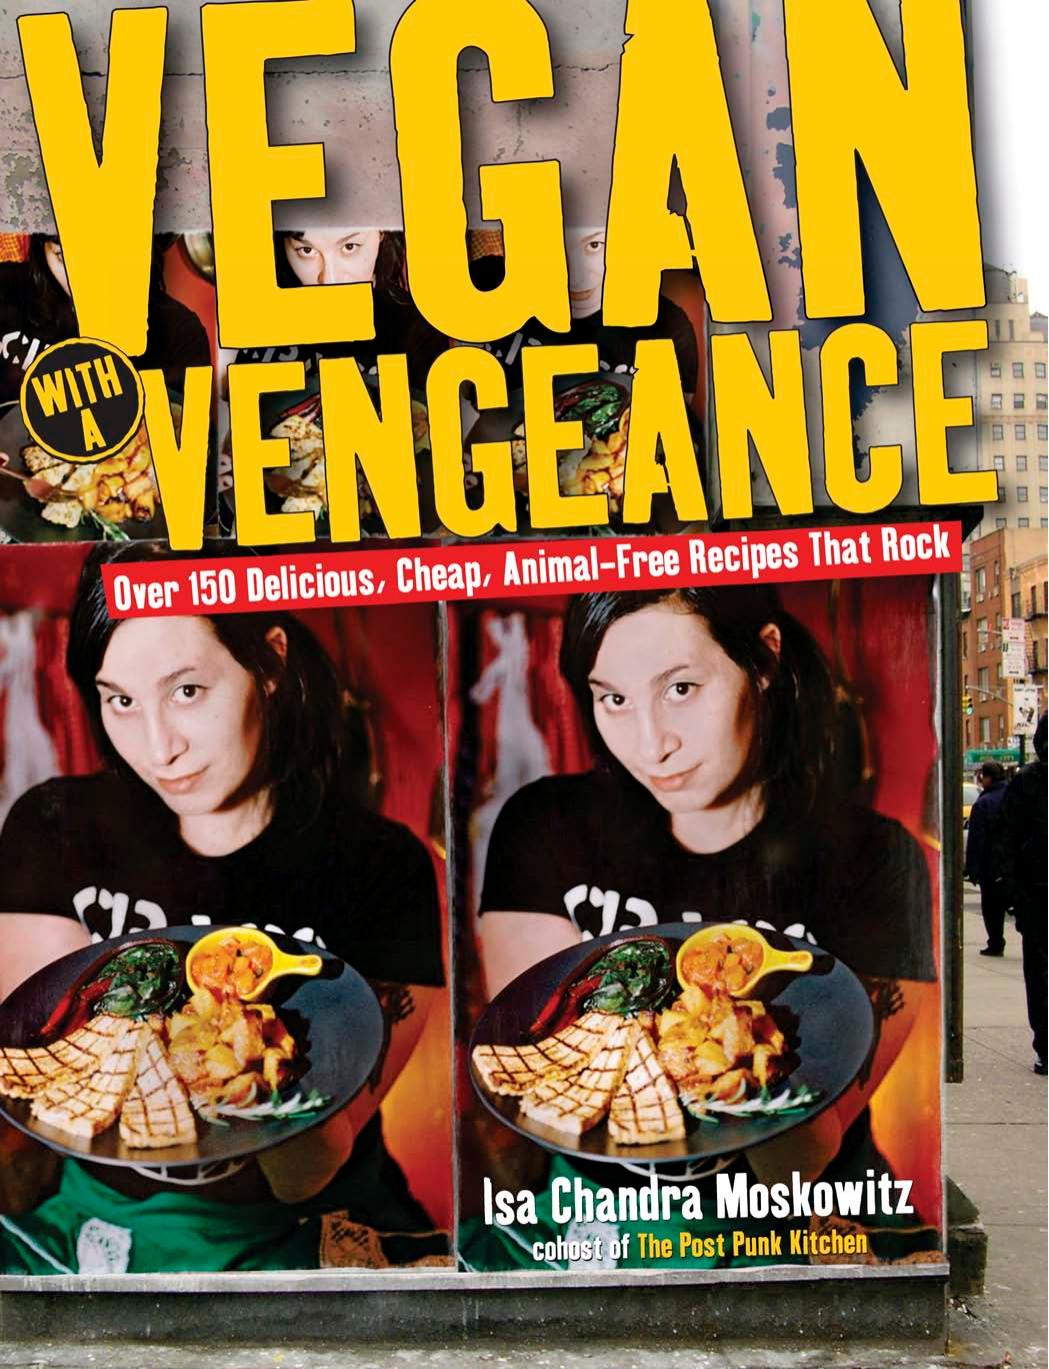 Vegan with a Vengeance by Isa Chandra Moskowitz